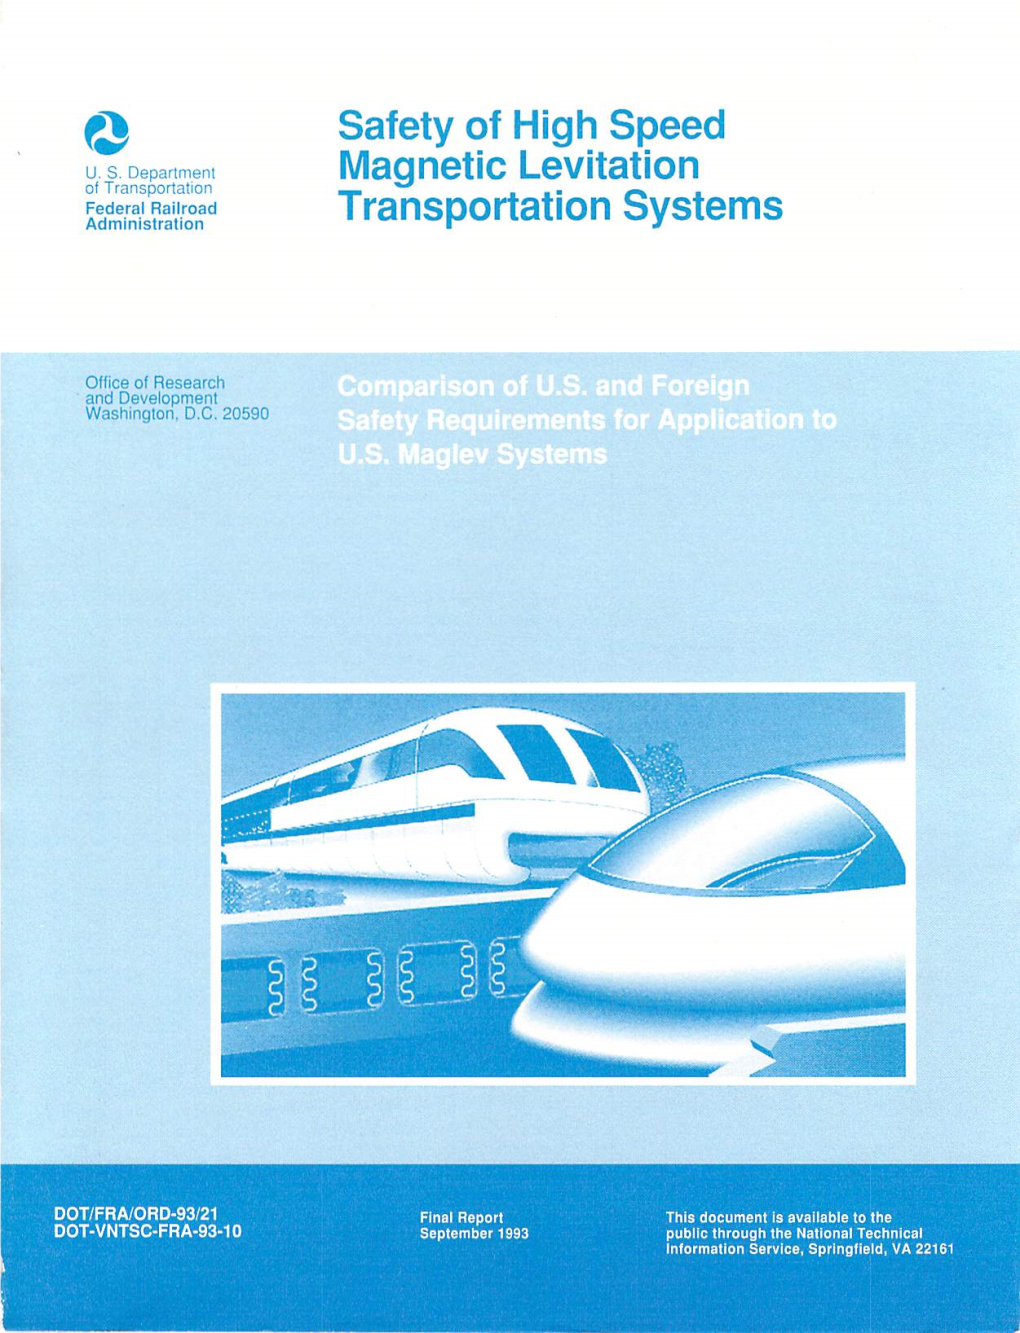 Safety of High Speed Transportation Systems